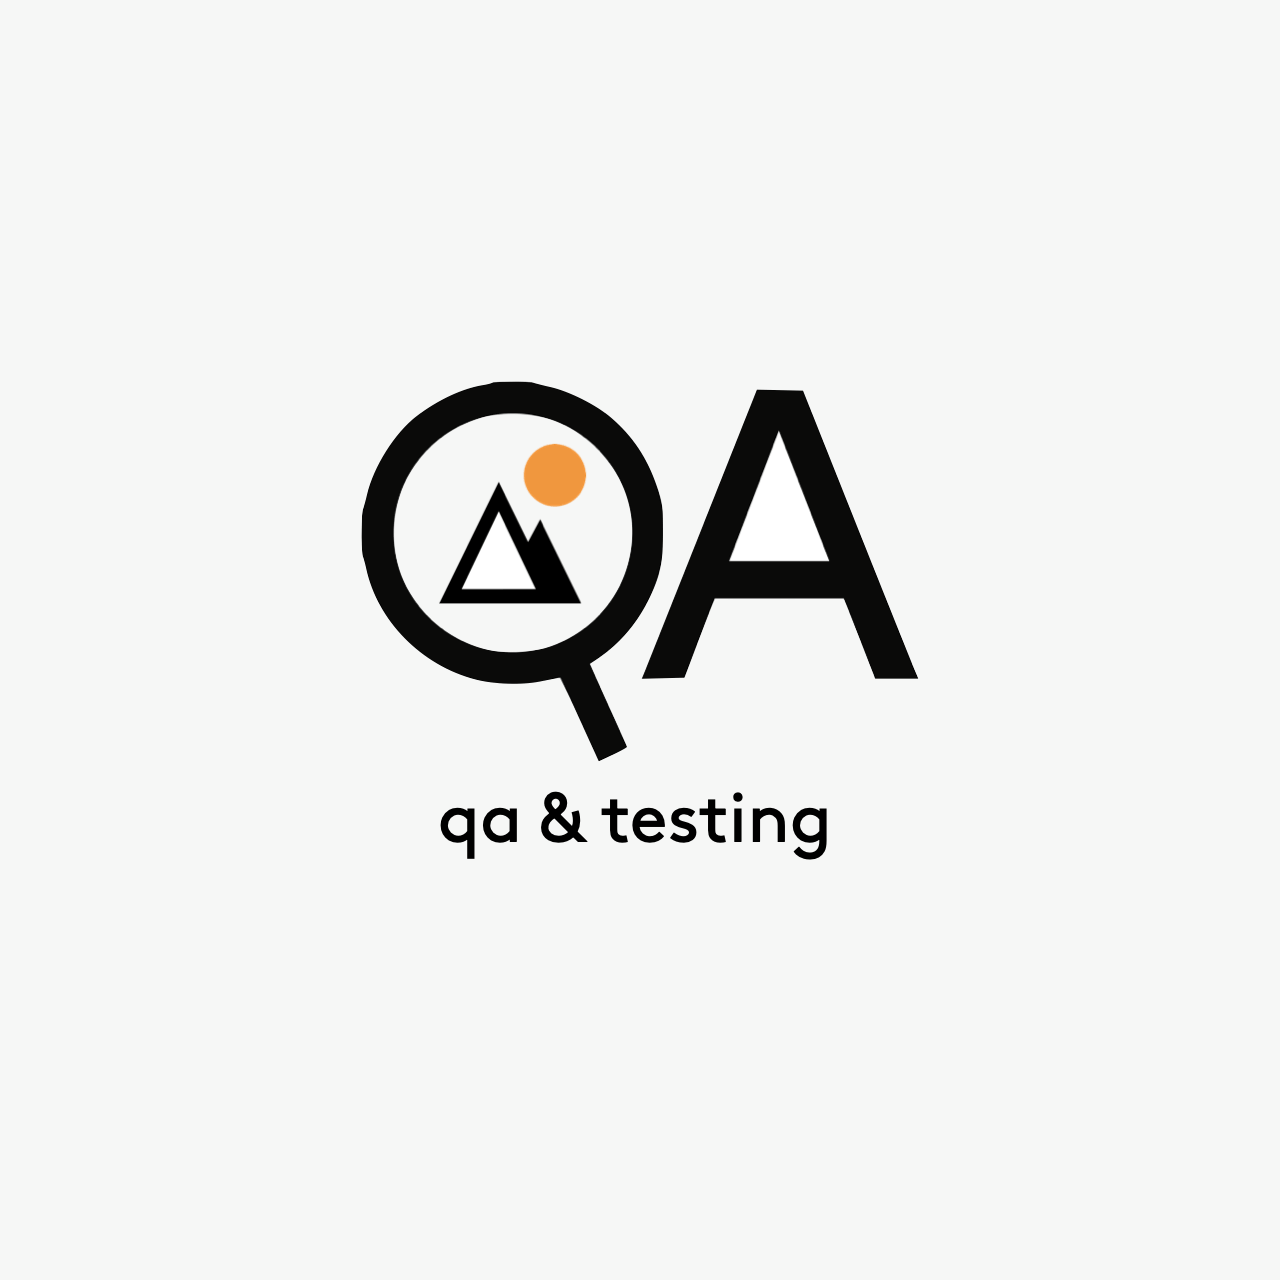 Quality assurance (QA) and Testing services